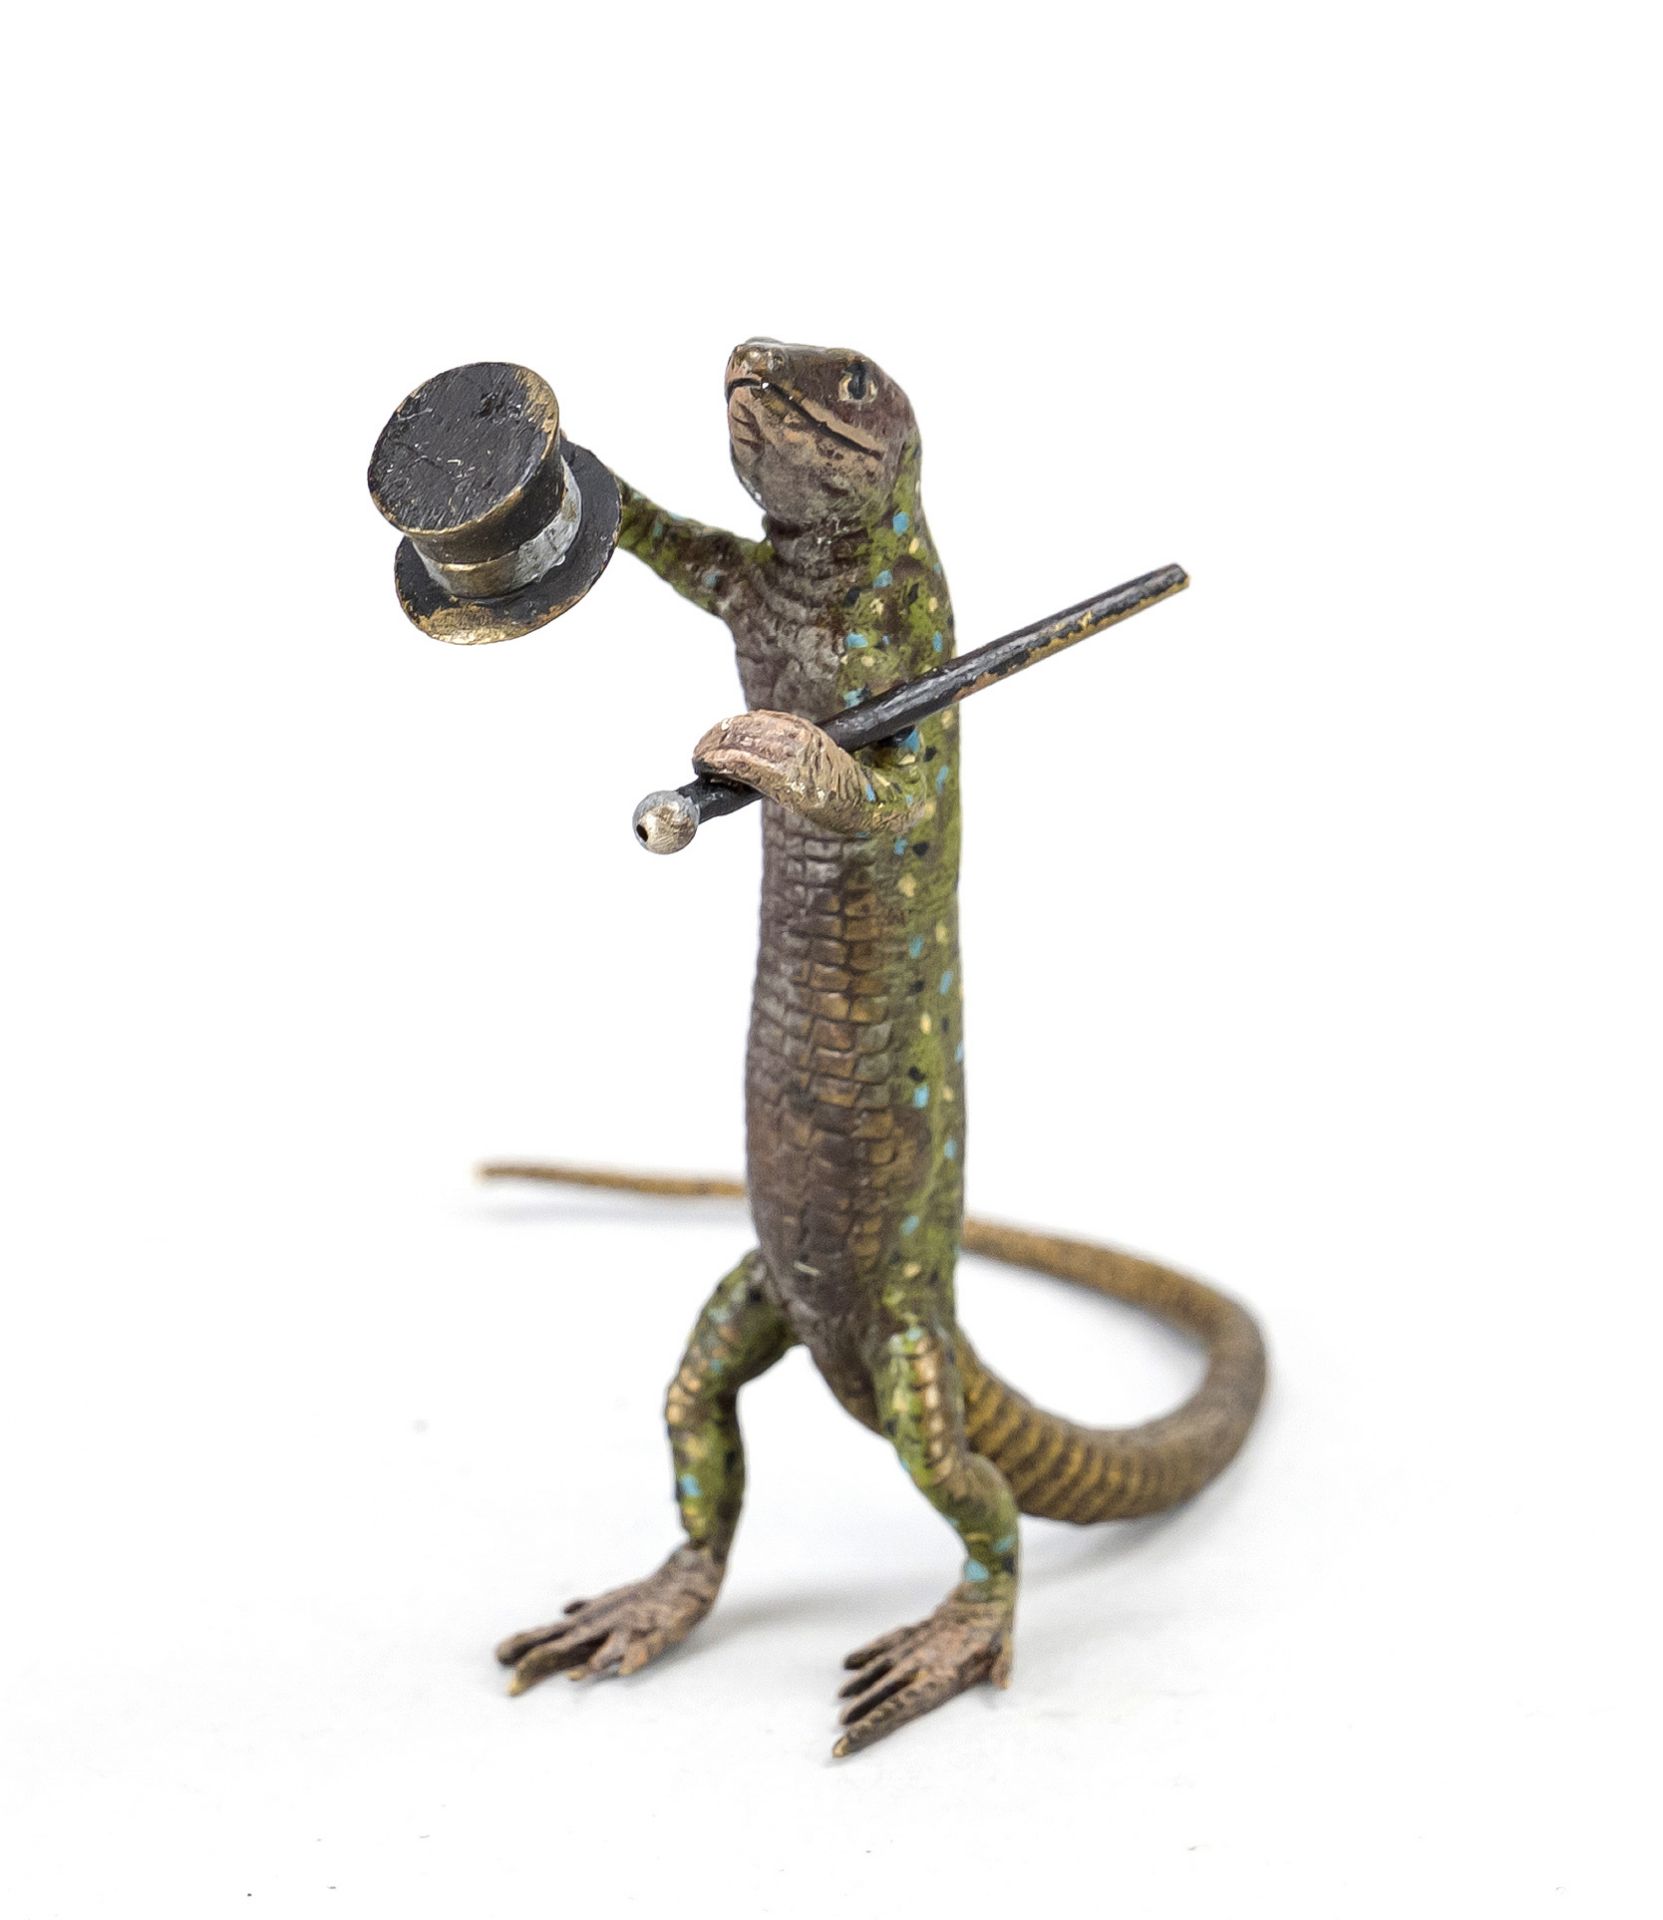 Small bronze in the style of Viennese bronzes, 20th century, lizard with top hat, polychrome cold-